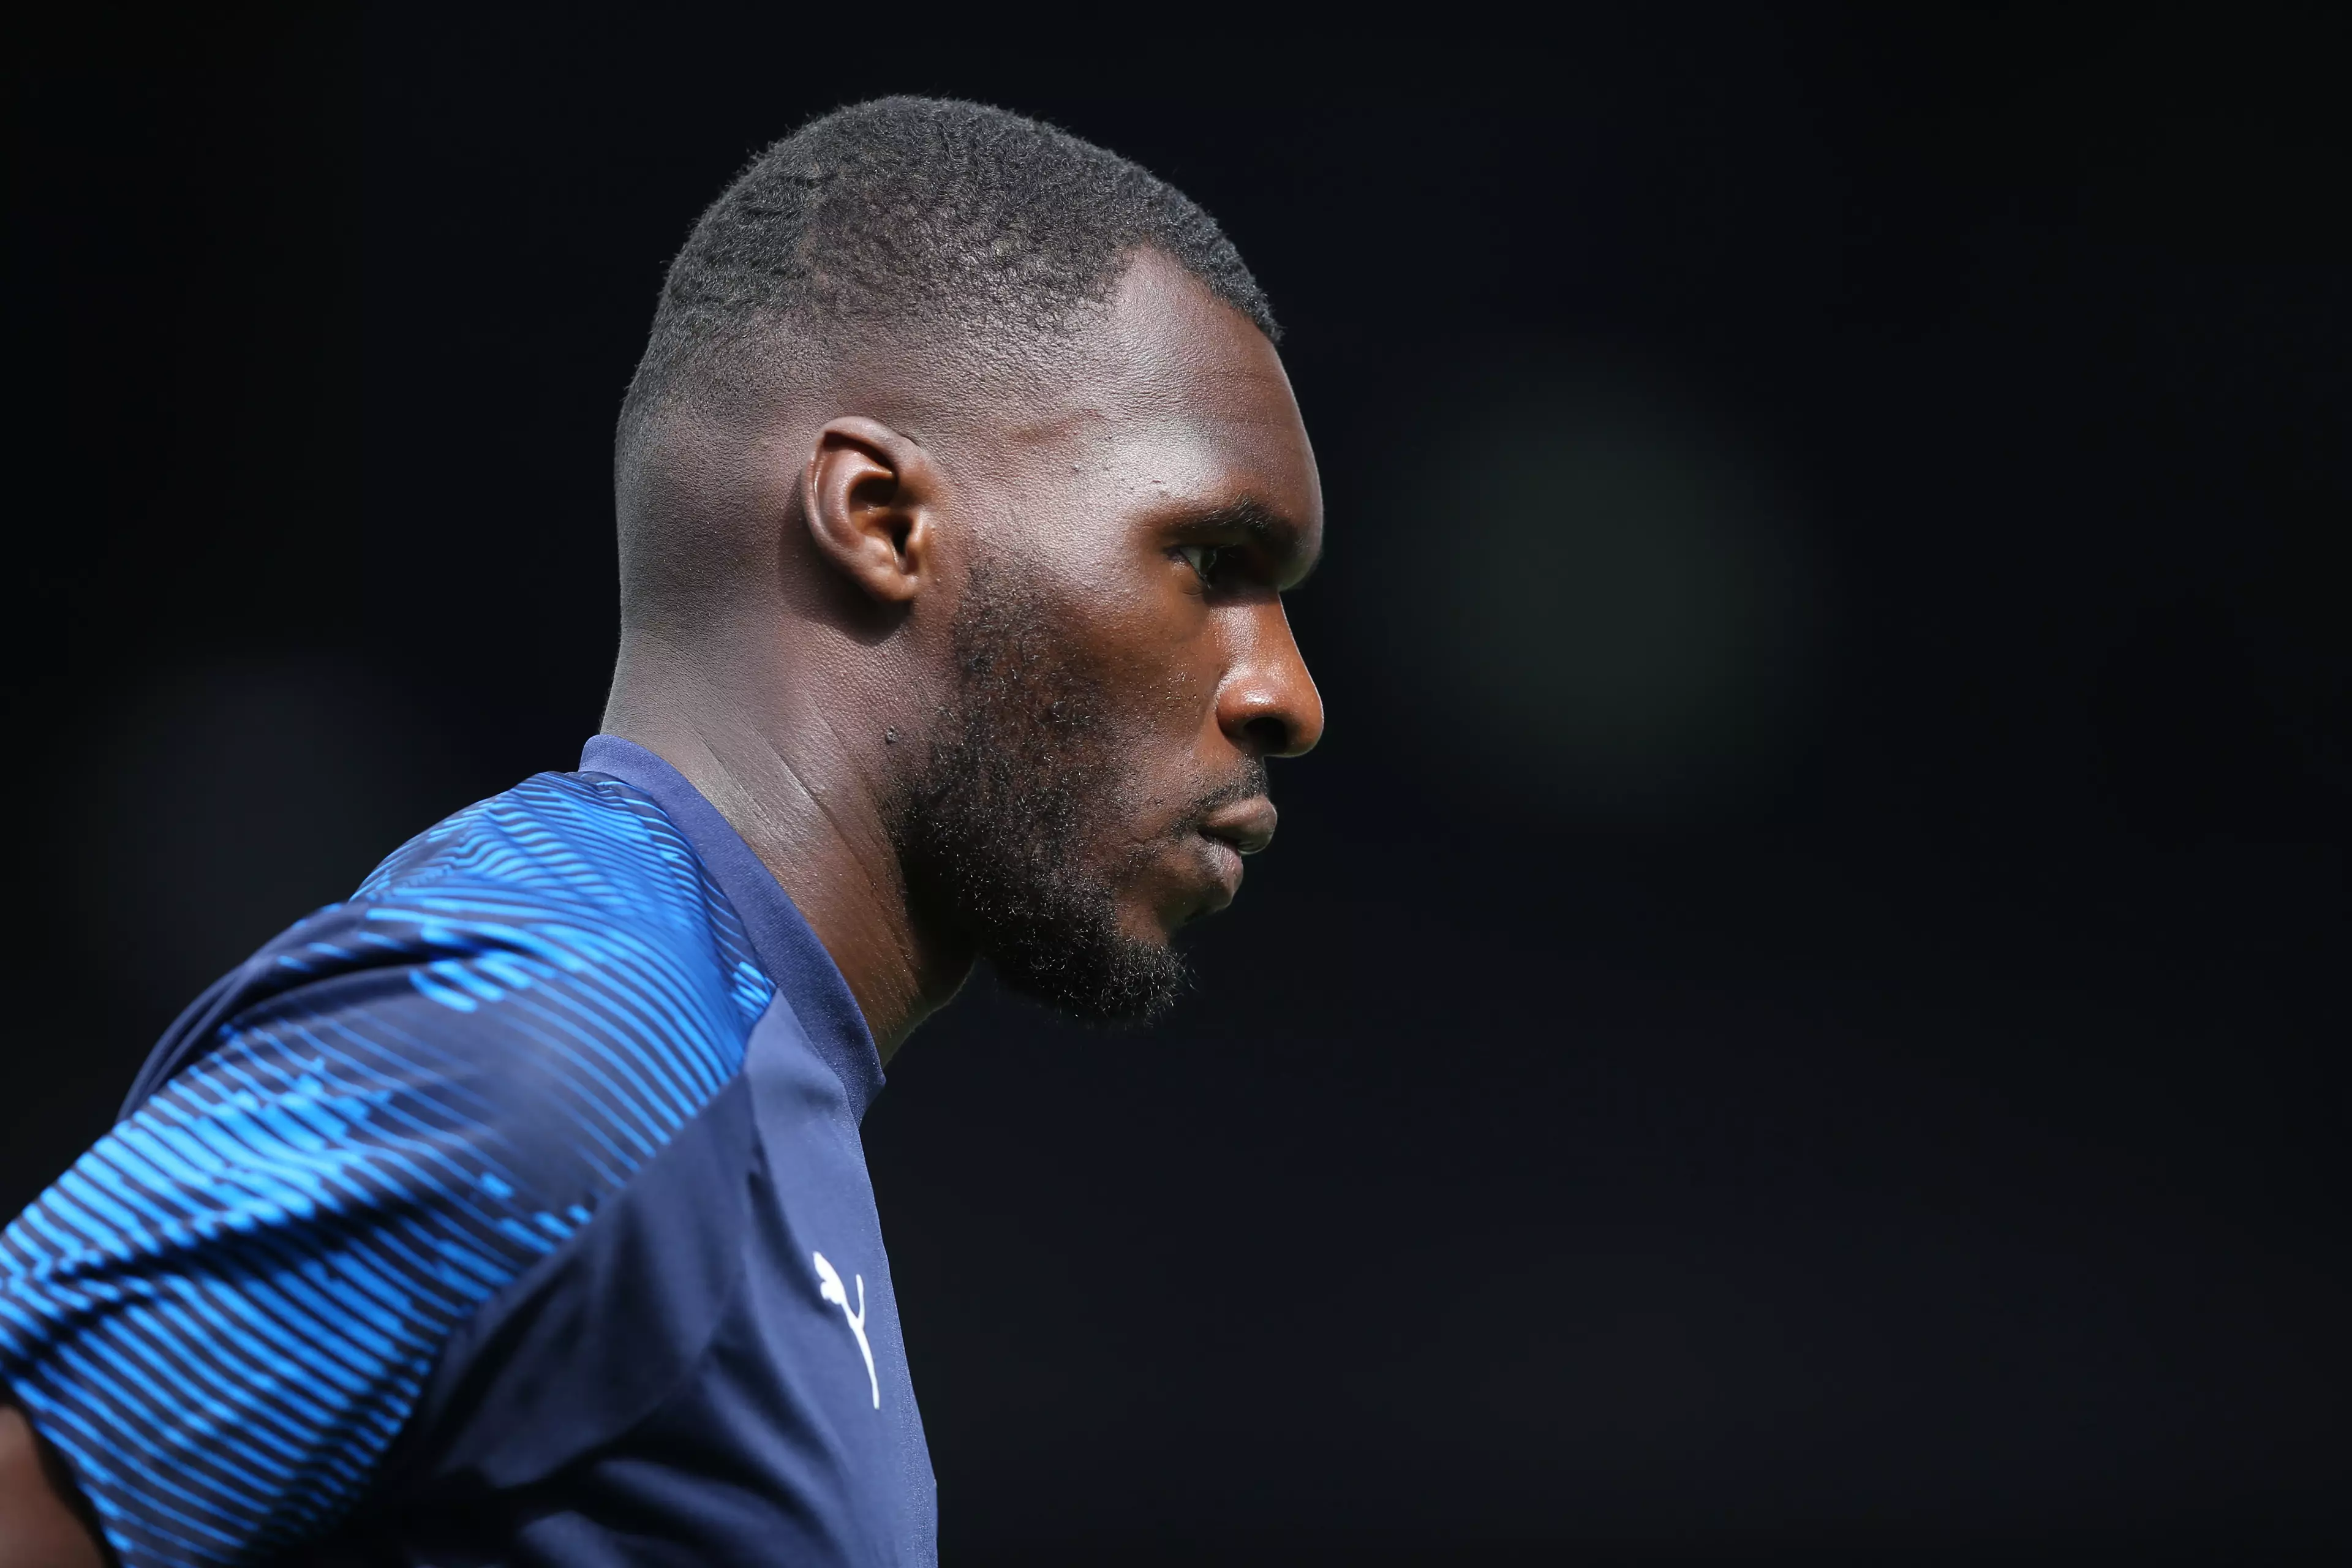 Christian Benteke has received abuse on social media because of his lack of goals